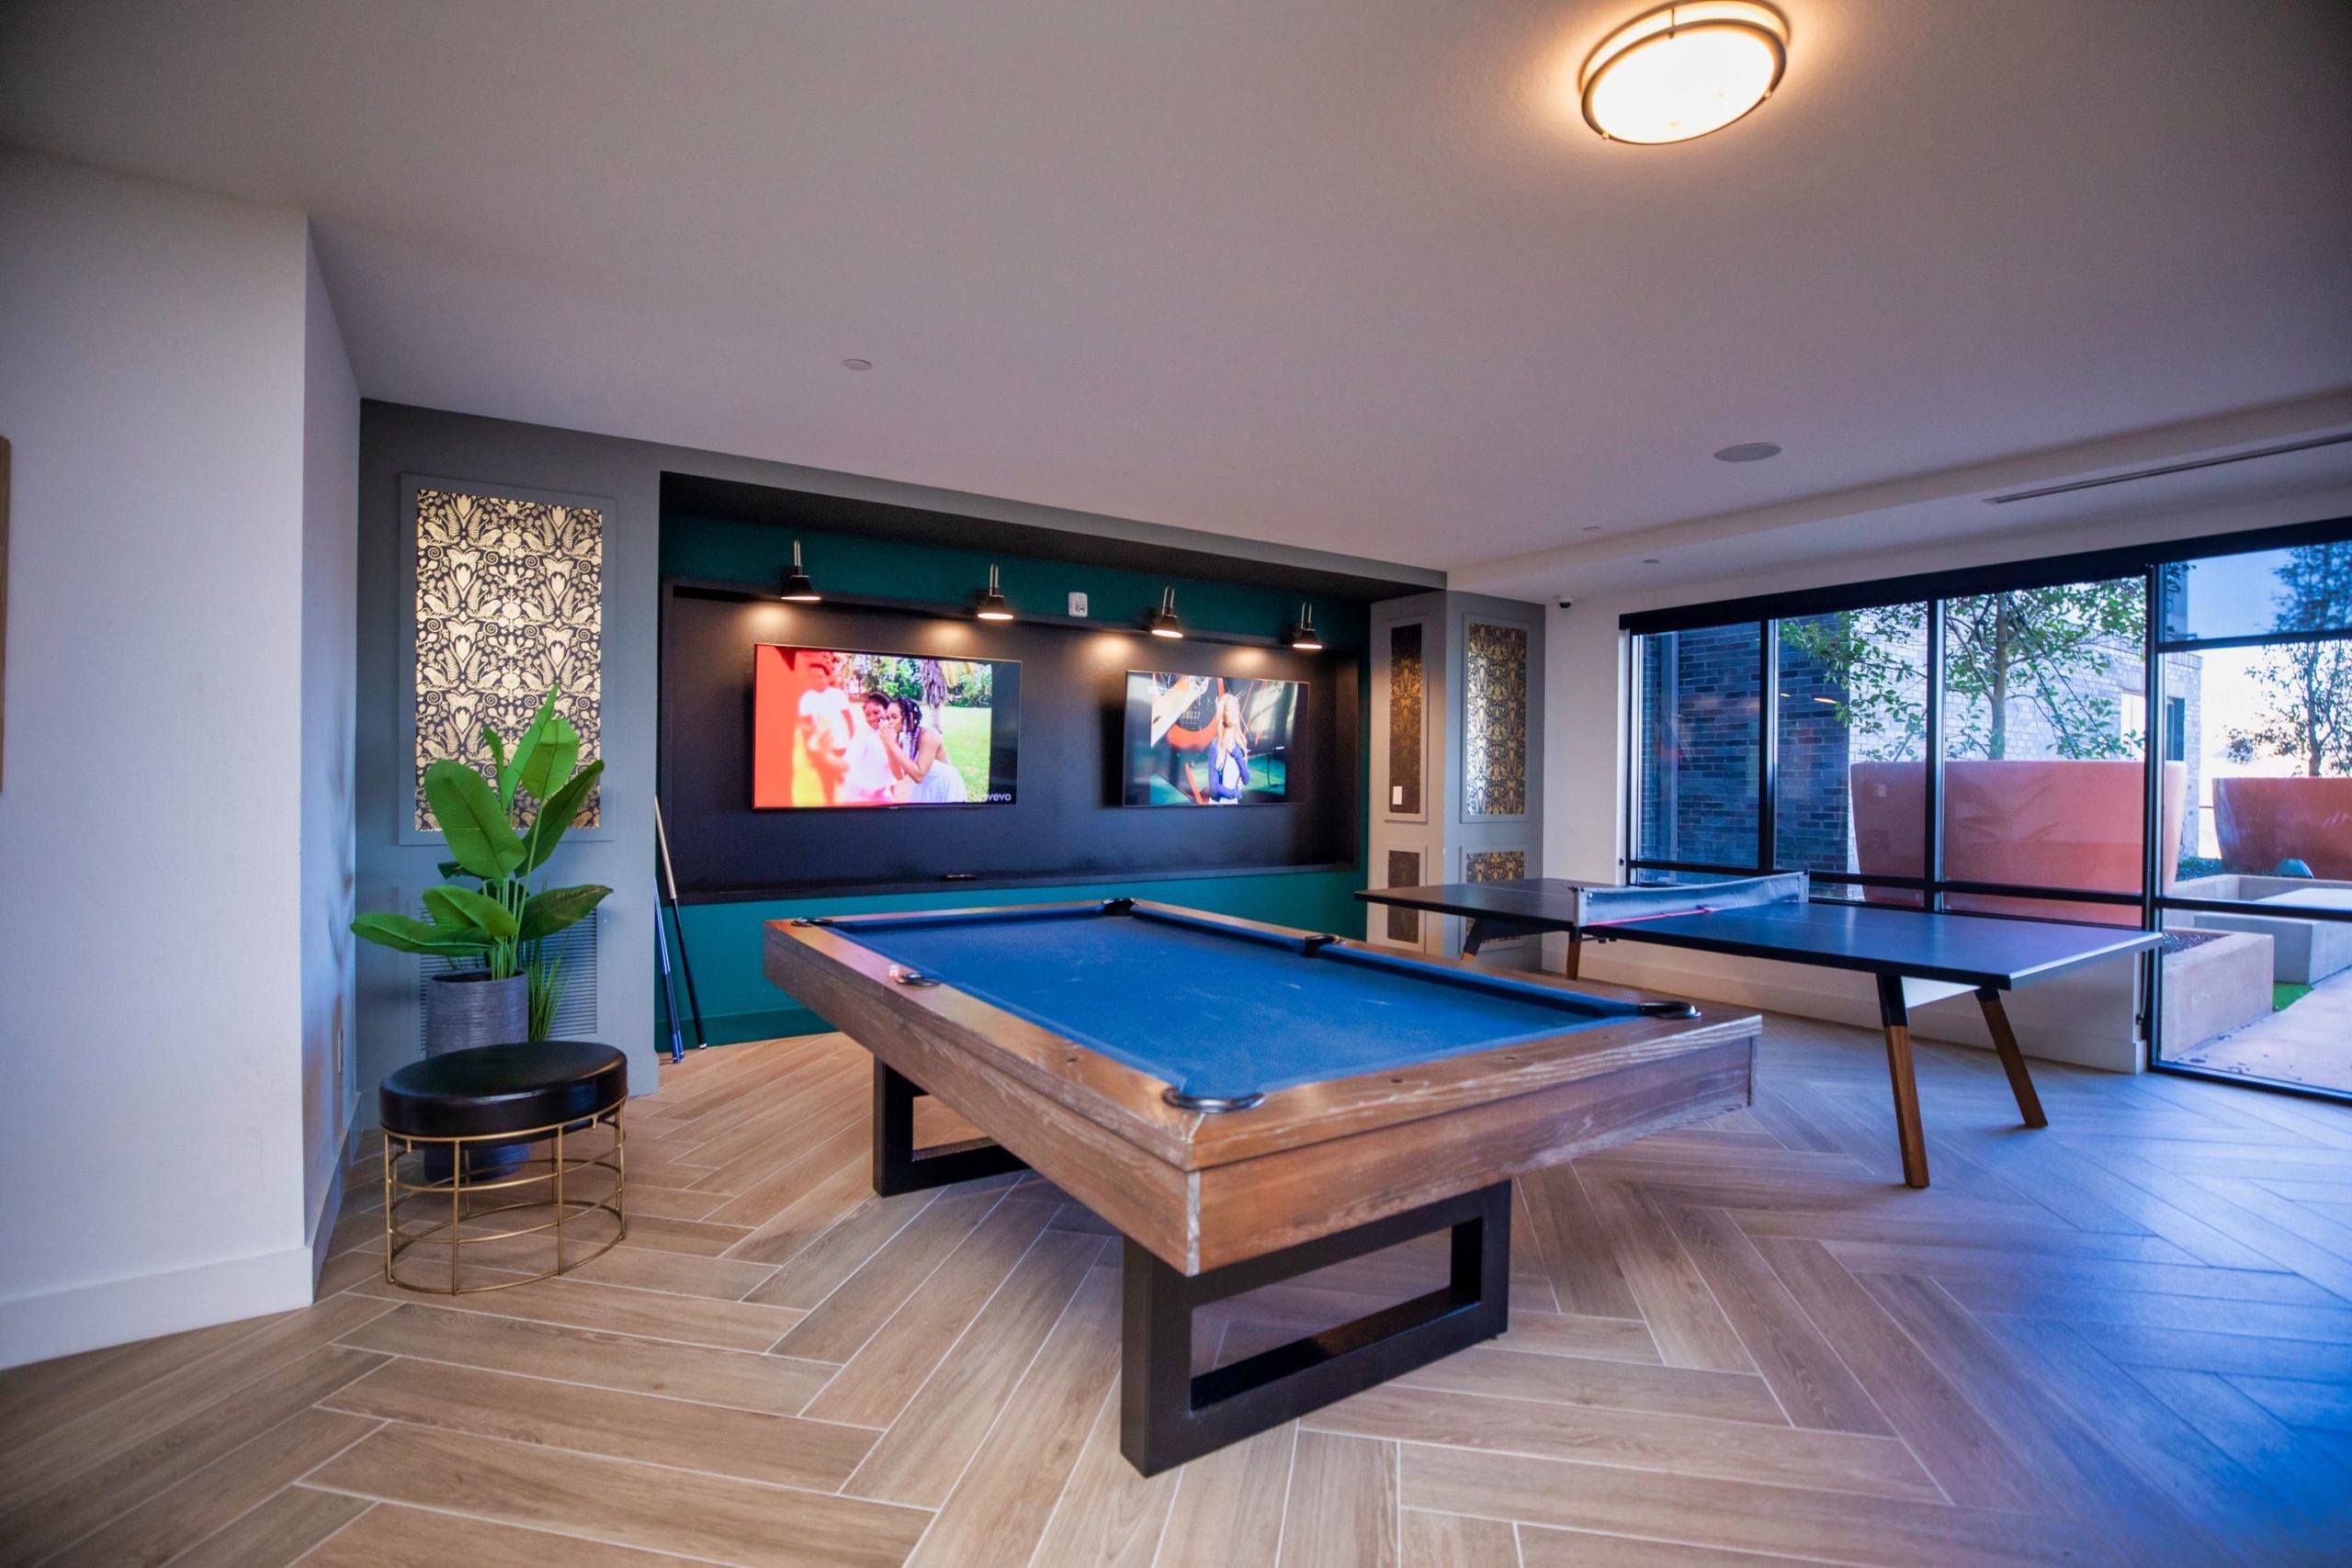 pool table, games, couches